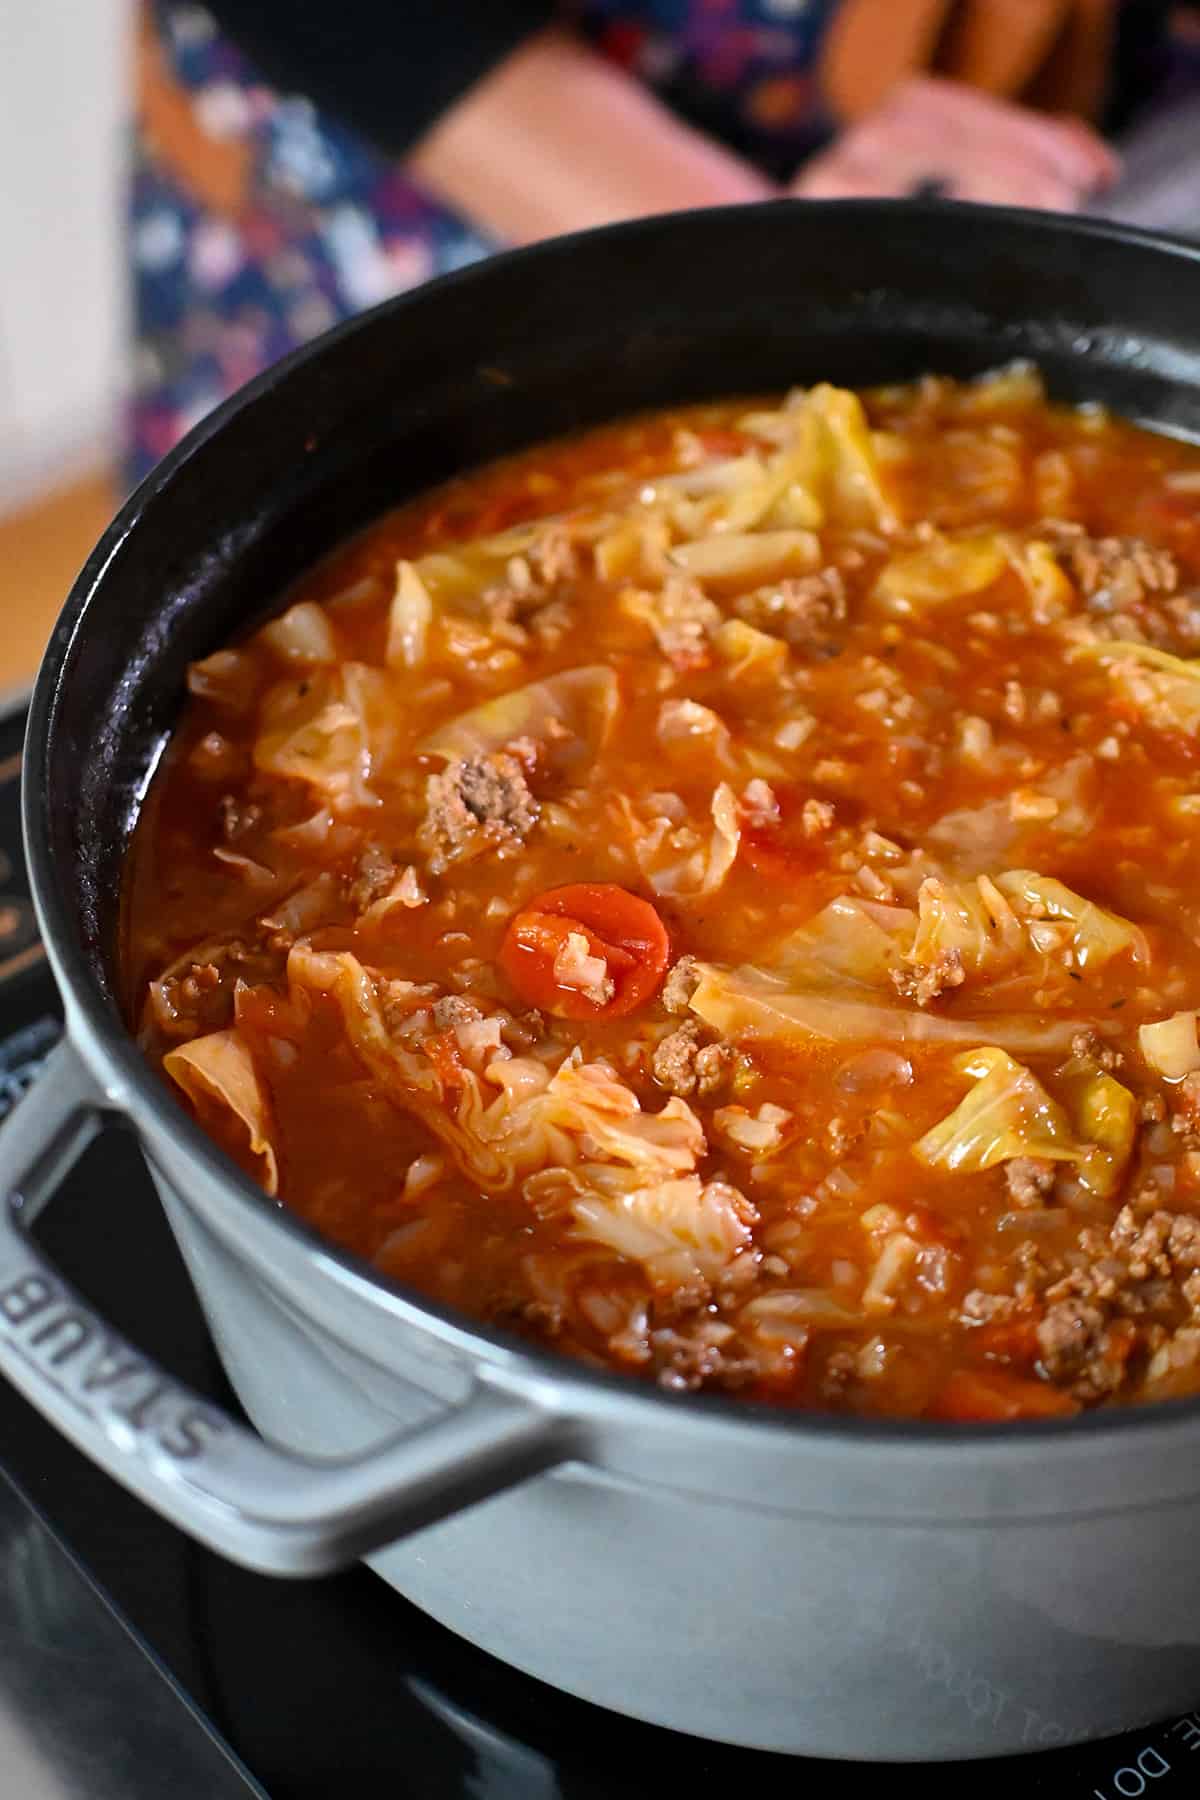 A side view of a gray pot filled with paleo and Whole30 stuffed cabbage soup, or cabbage roll soup.